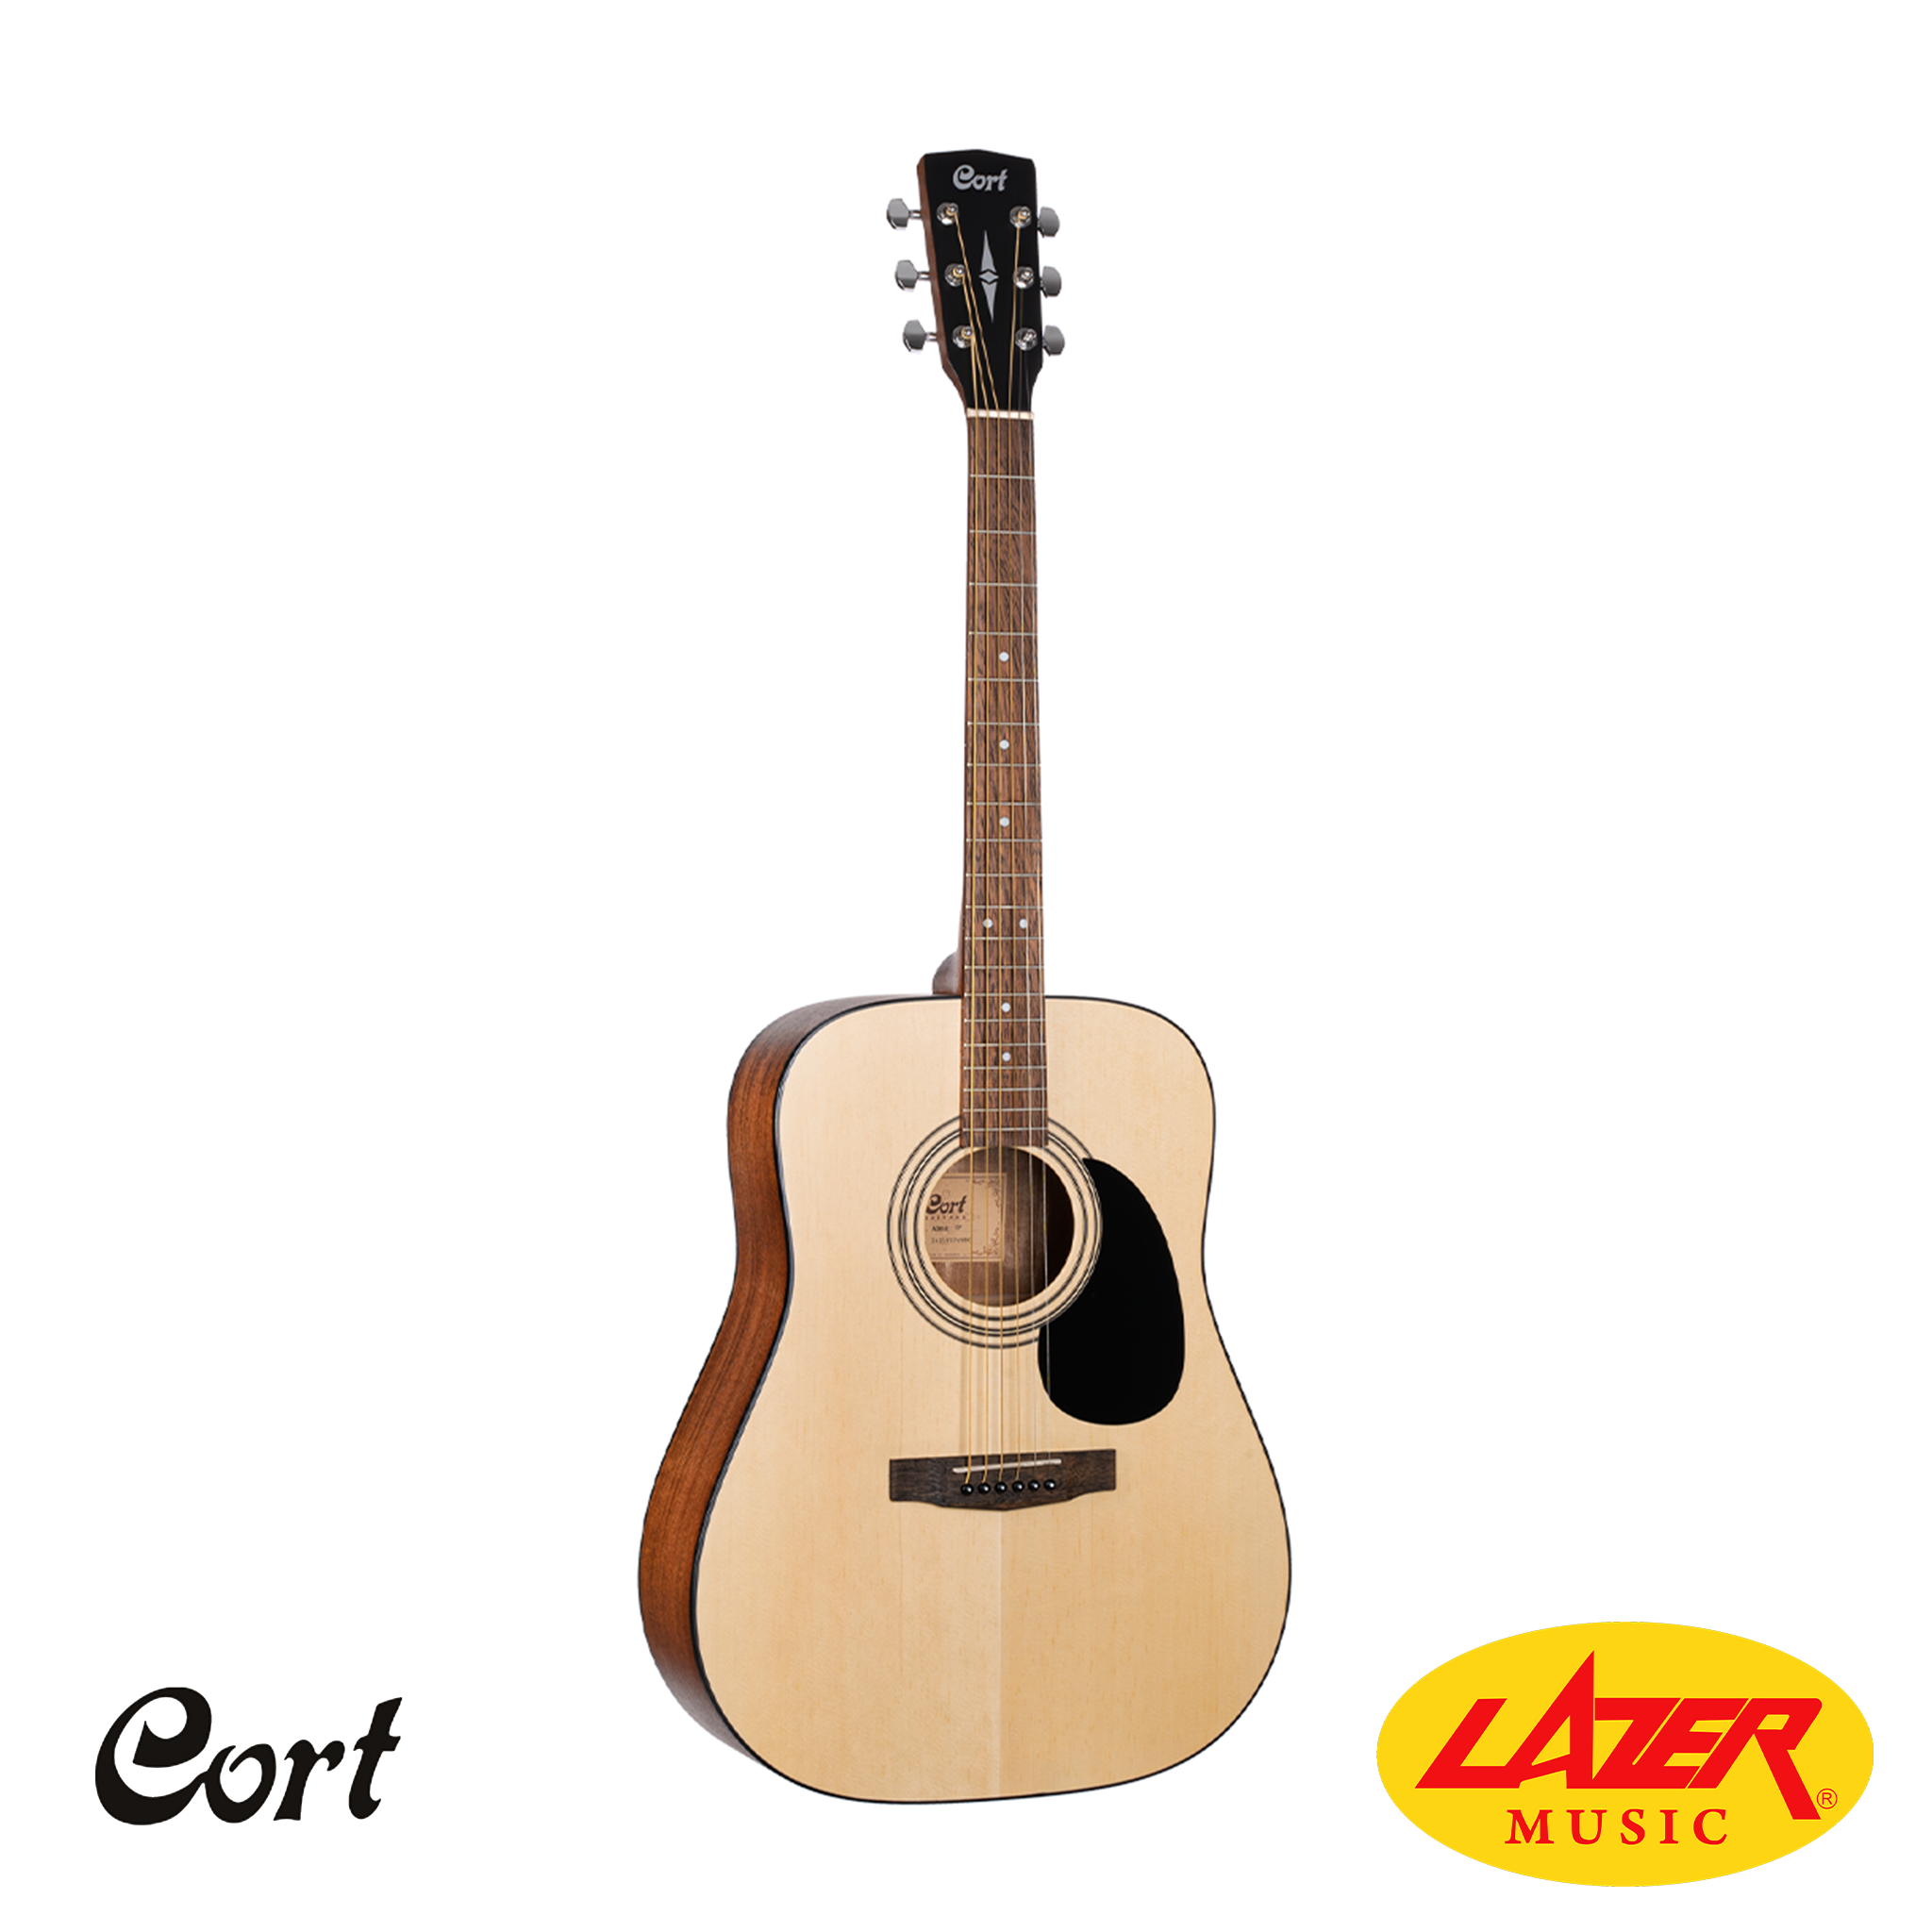 Cort Earth Pack Solid Top Dreadnought Acoustic Guitar W/ Strap, Picks, & Gig Bag